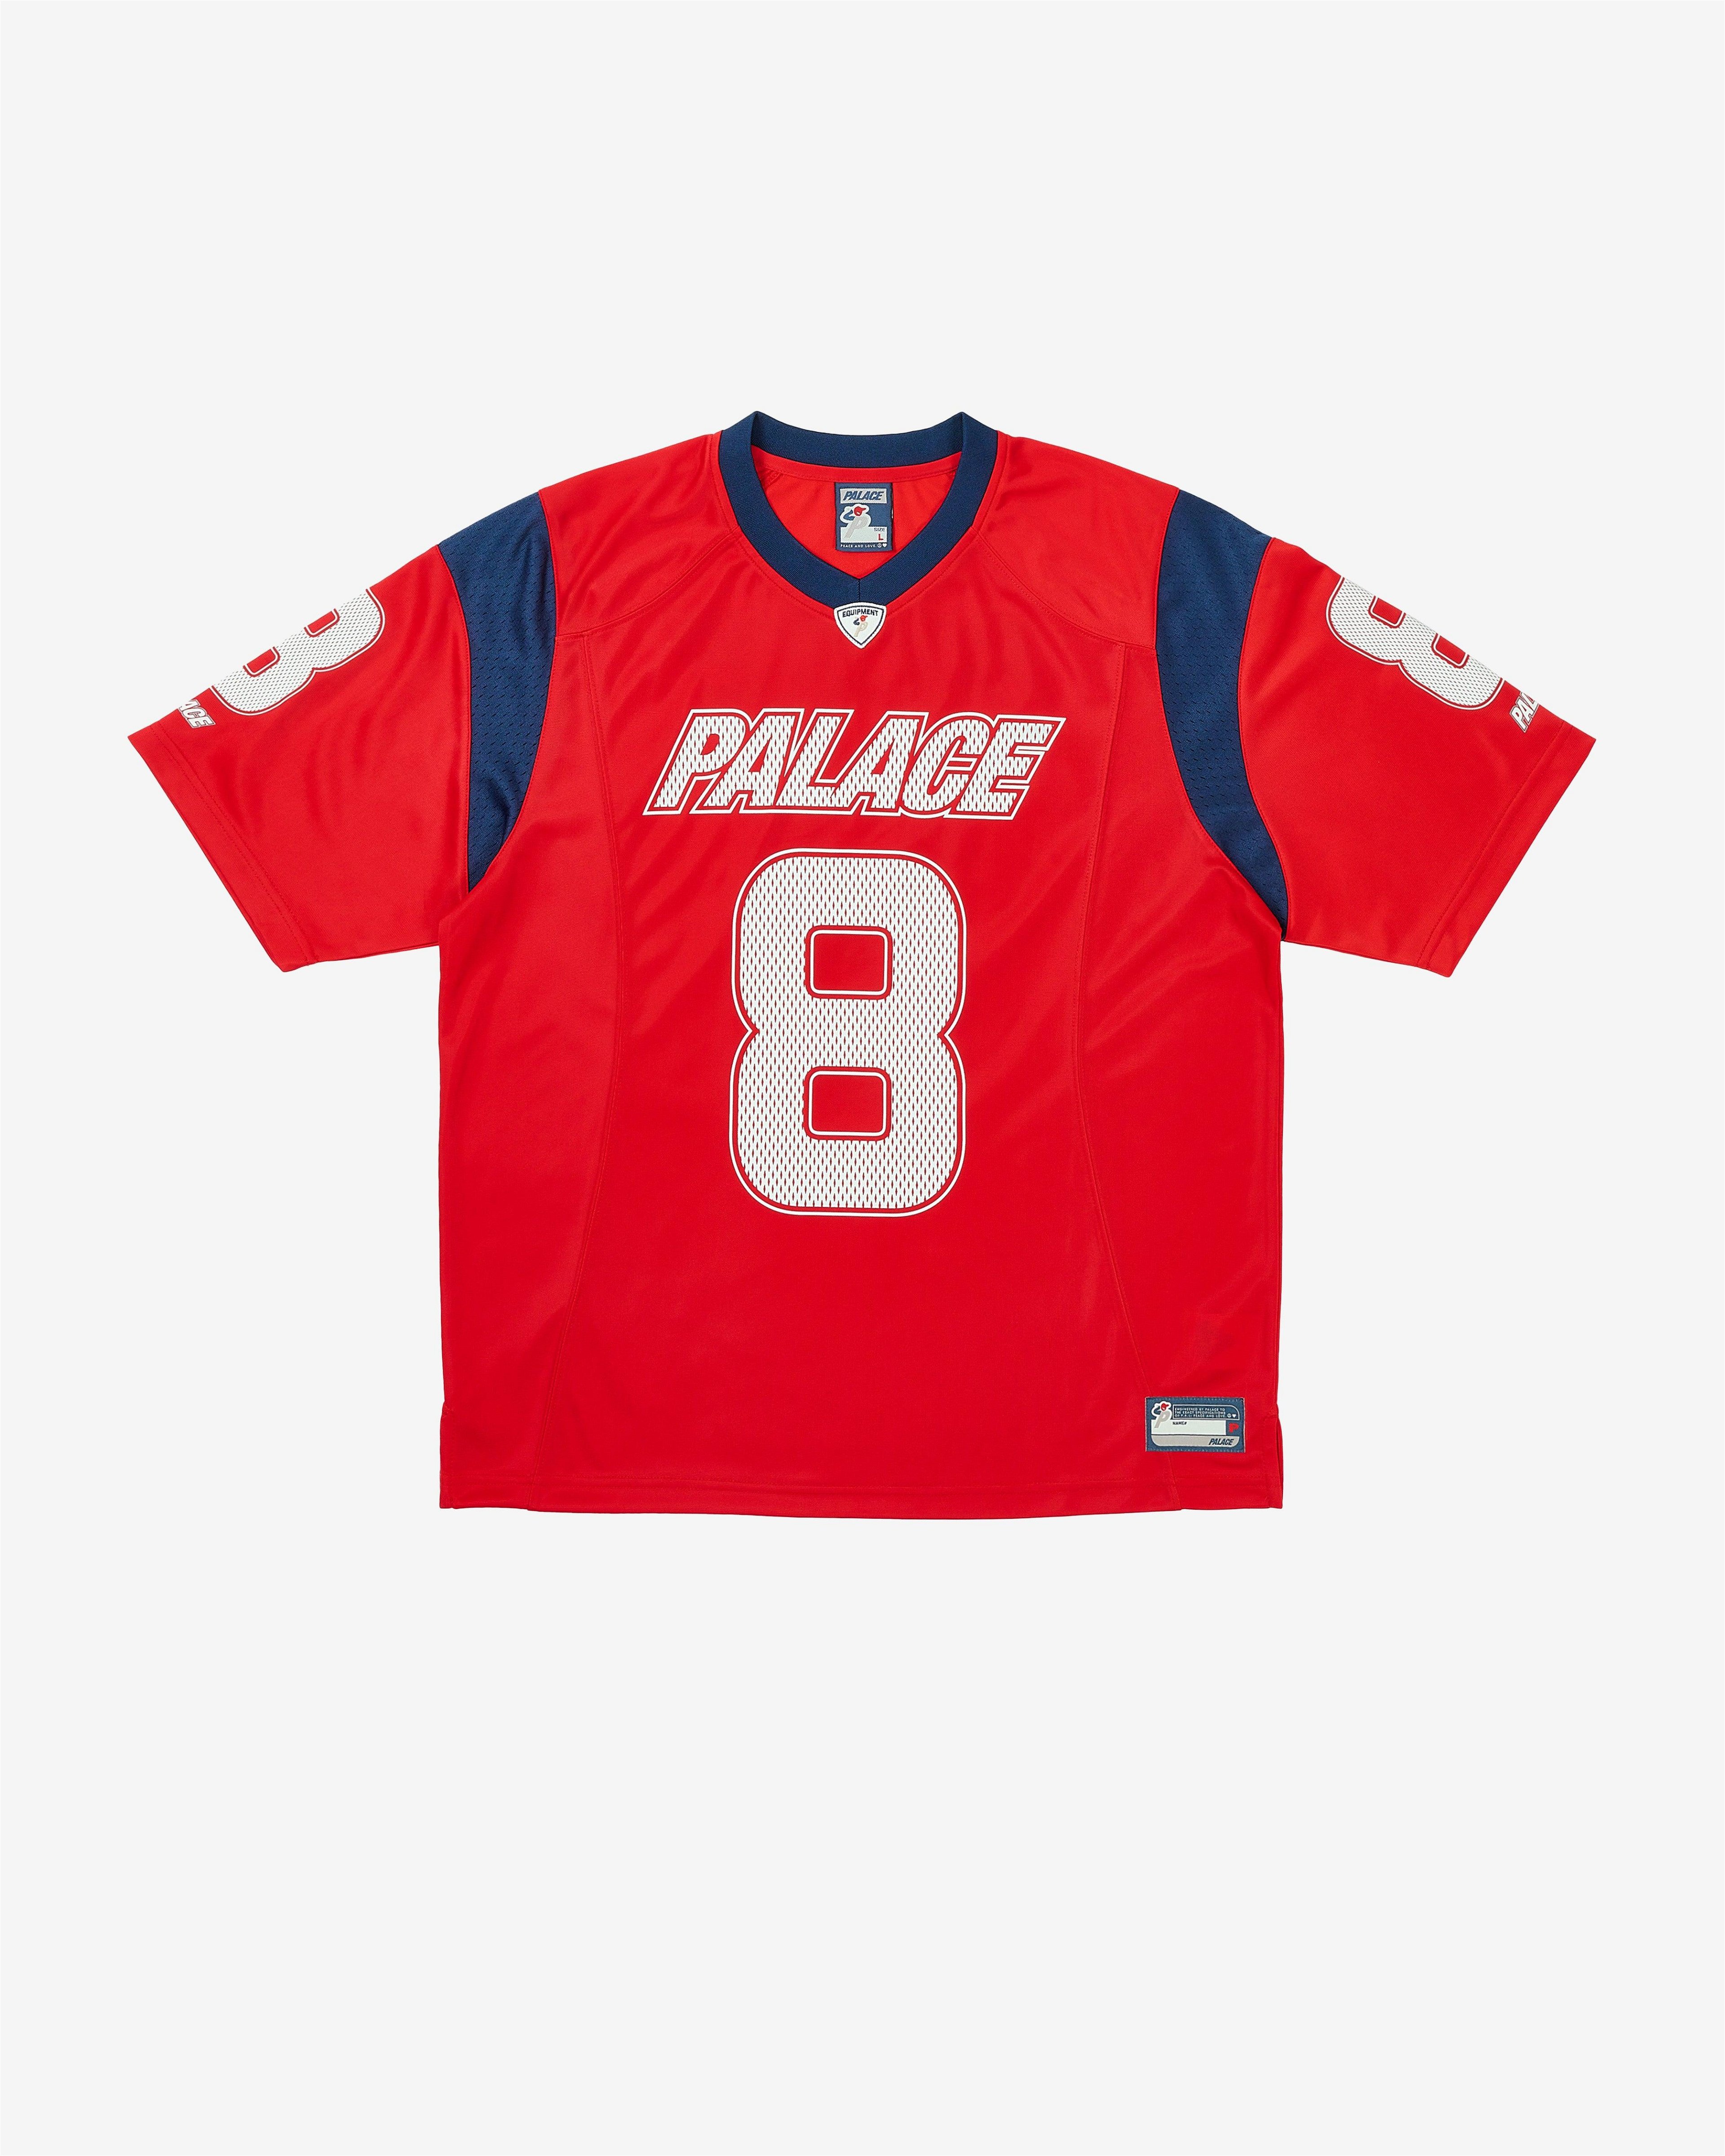 Palace - Men's Mesh Team Jersey - (Red) by PALACE